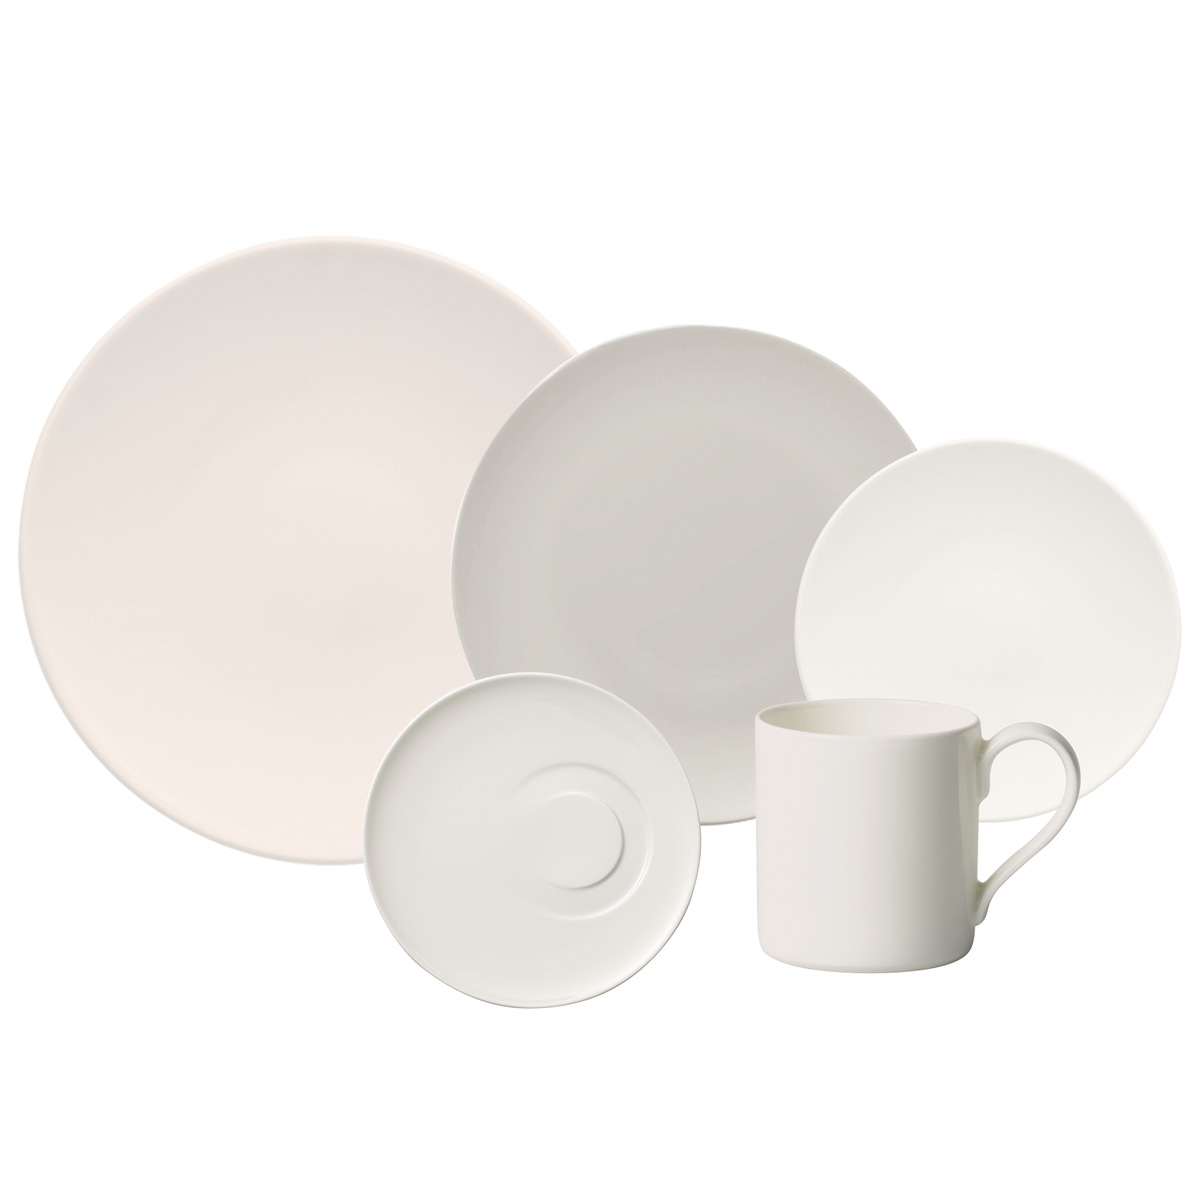 Villeroy and Boch MetroChic Blanc 5 Piece Place Setting